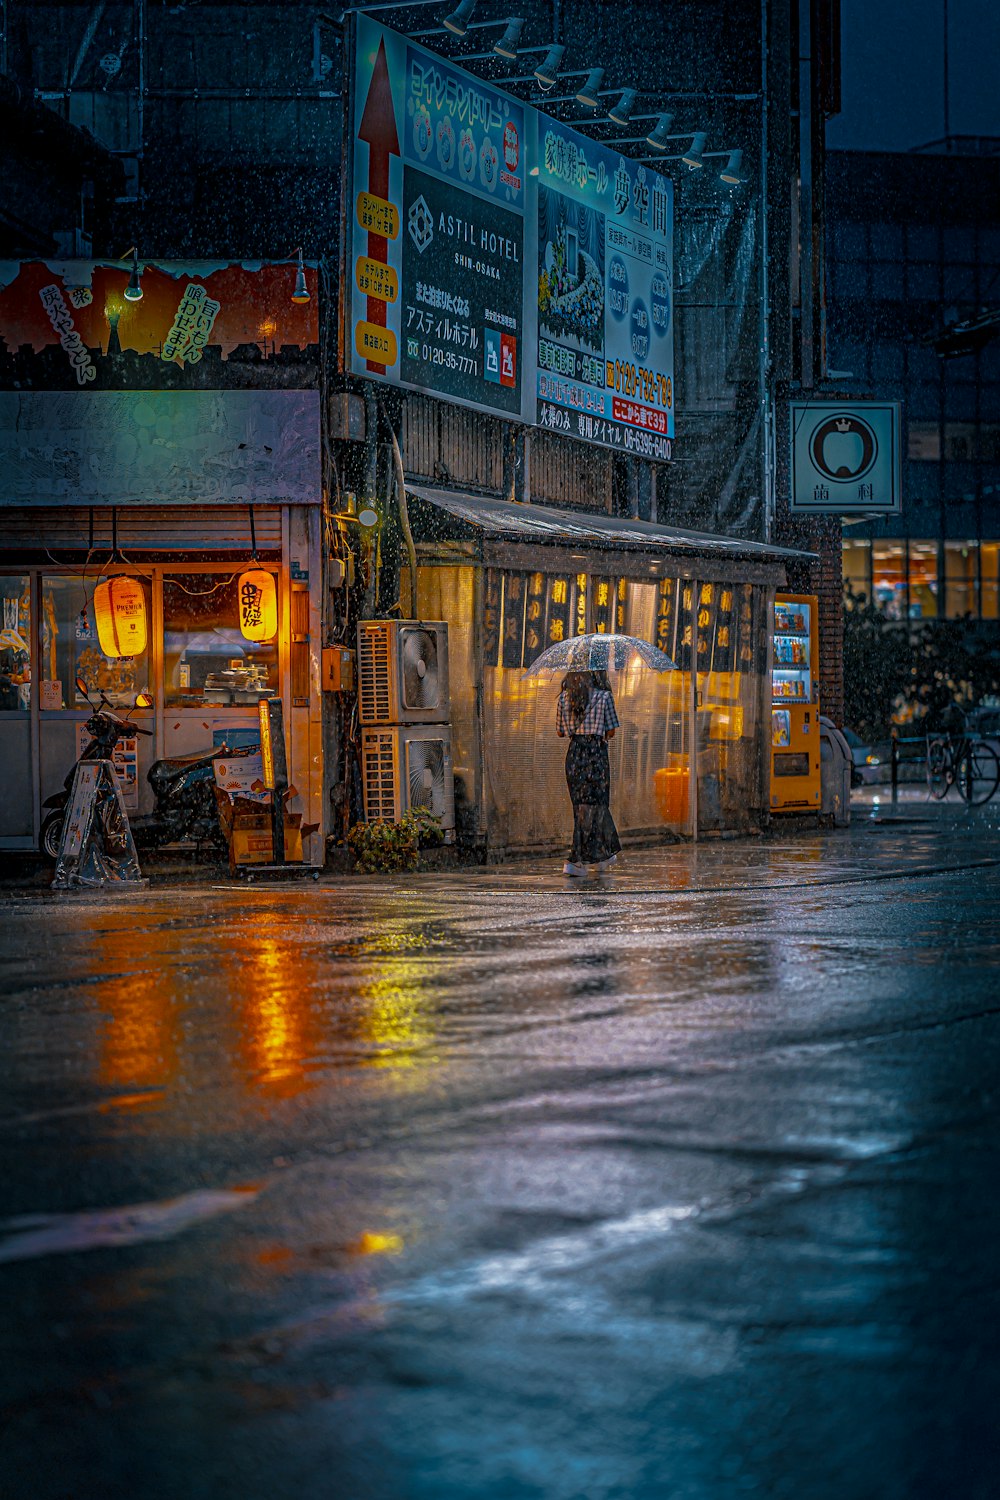 a person with an umbrella standing in the rain